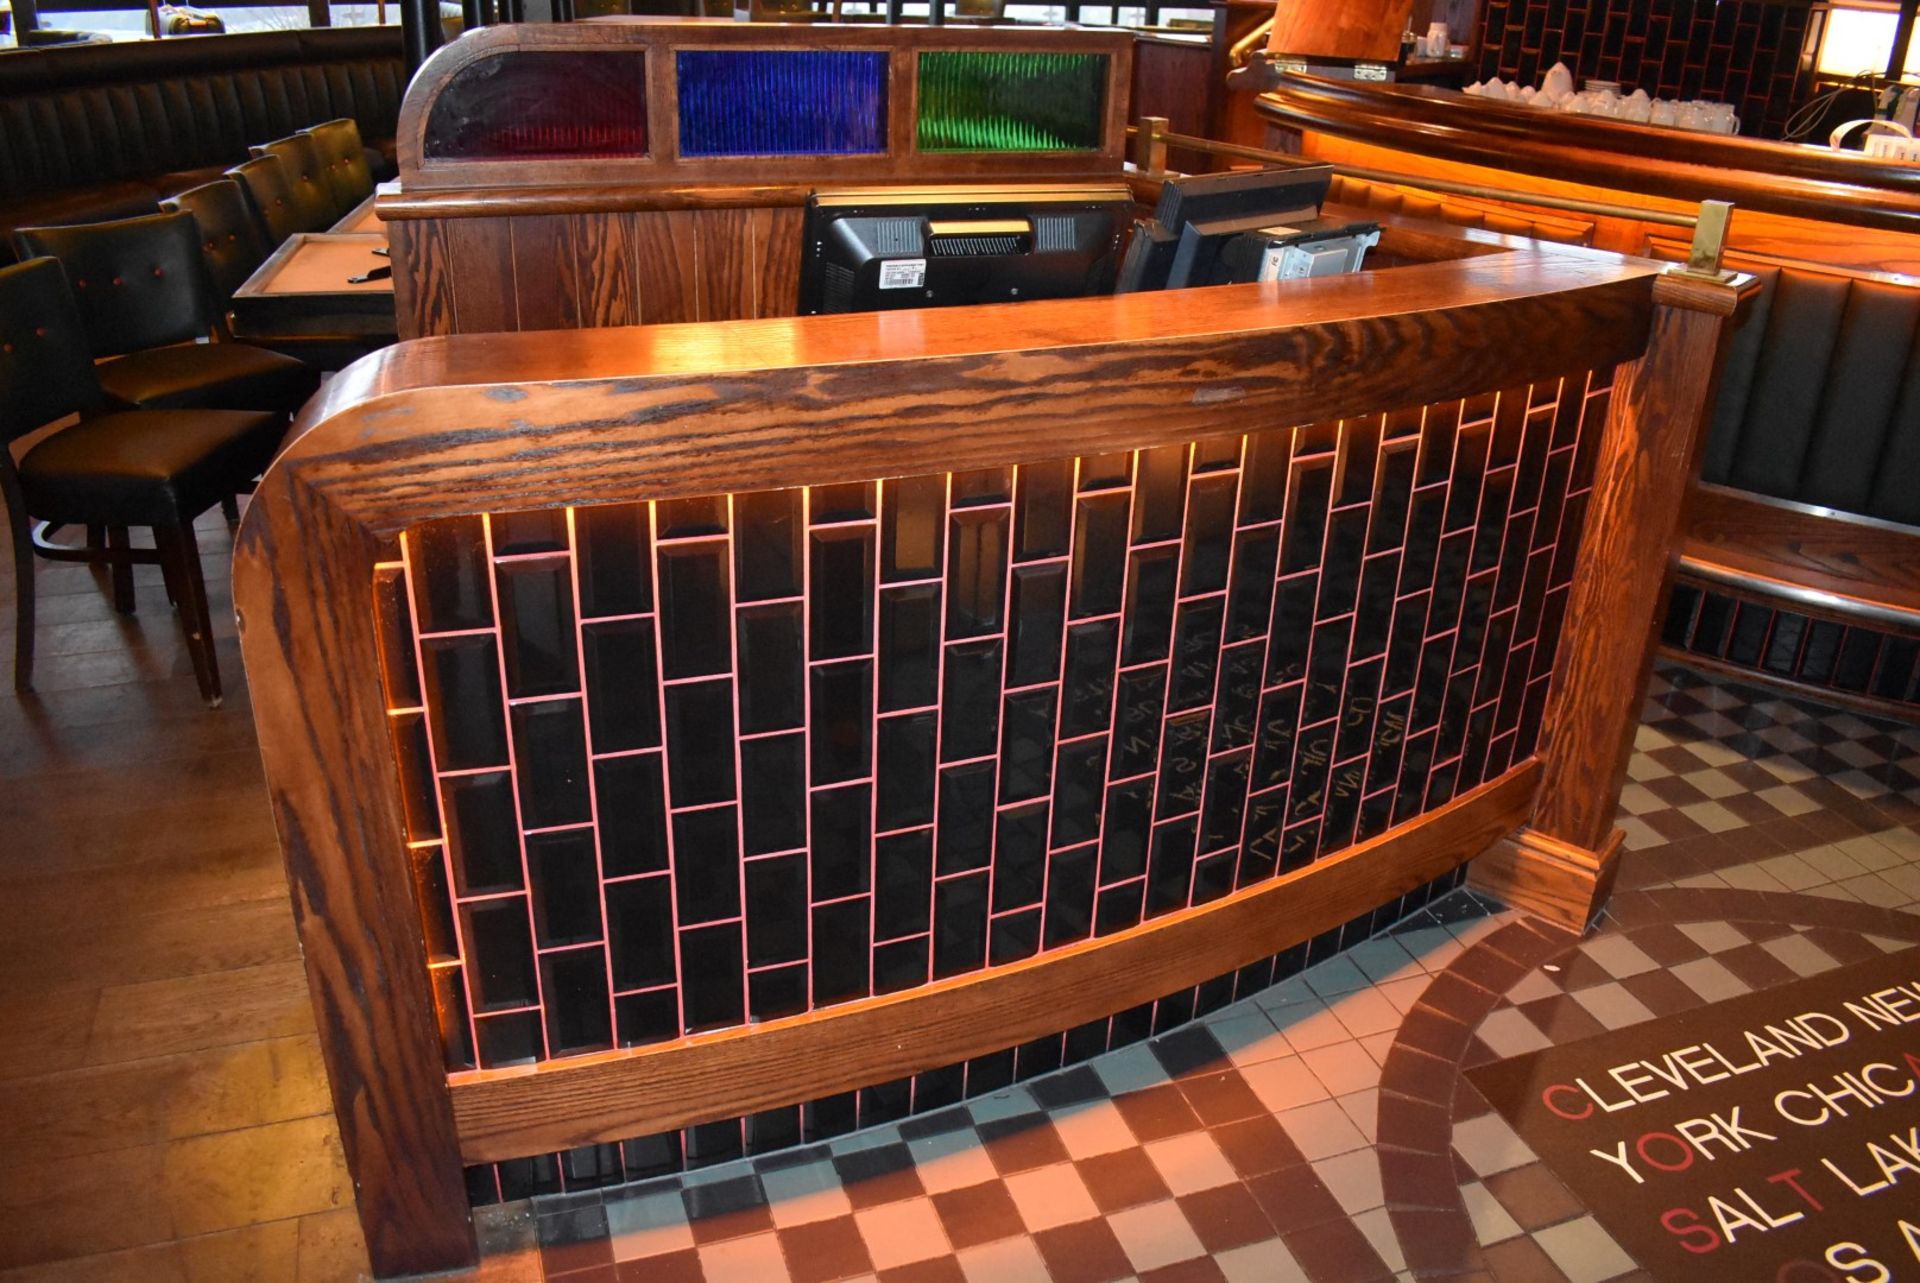 1 x Contemporary Restaurant Reception Counter With Rear Back Panel - Image 3 of 15